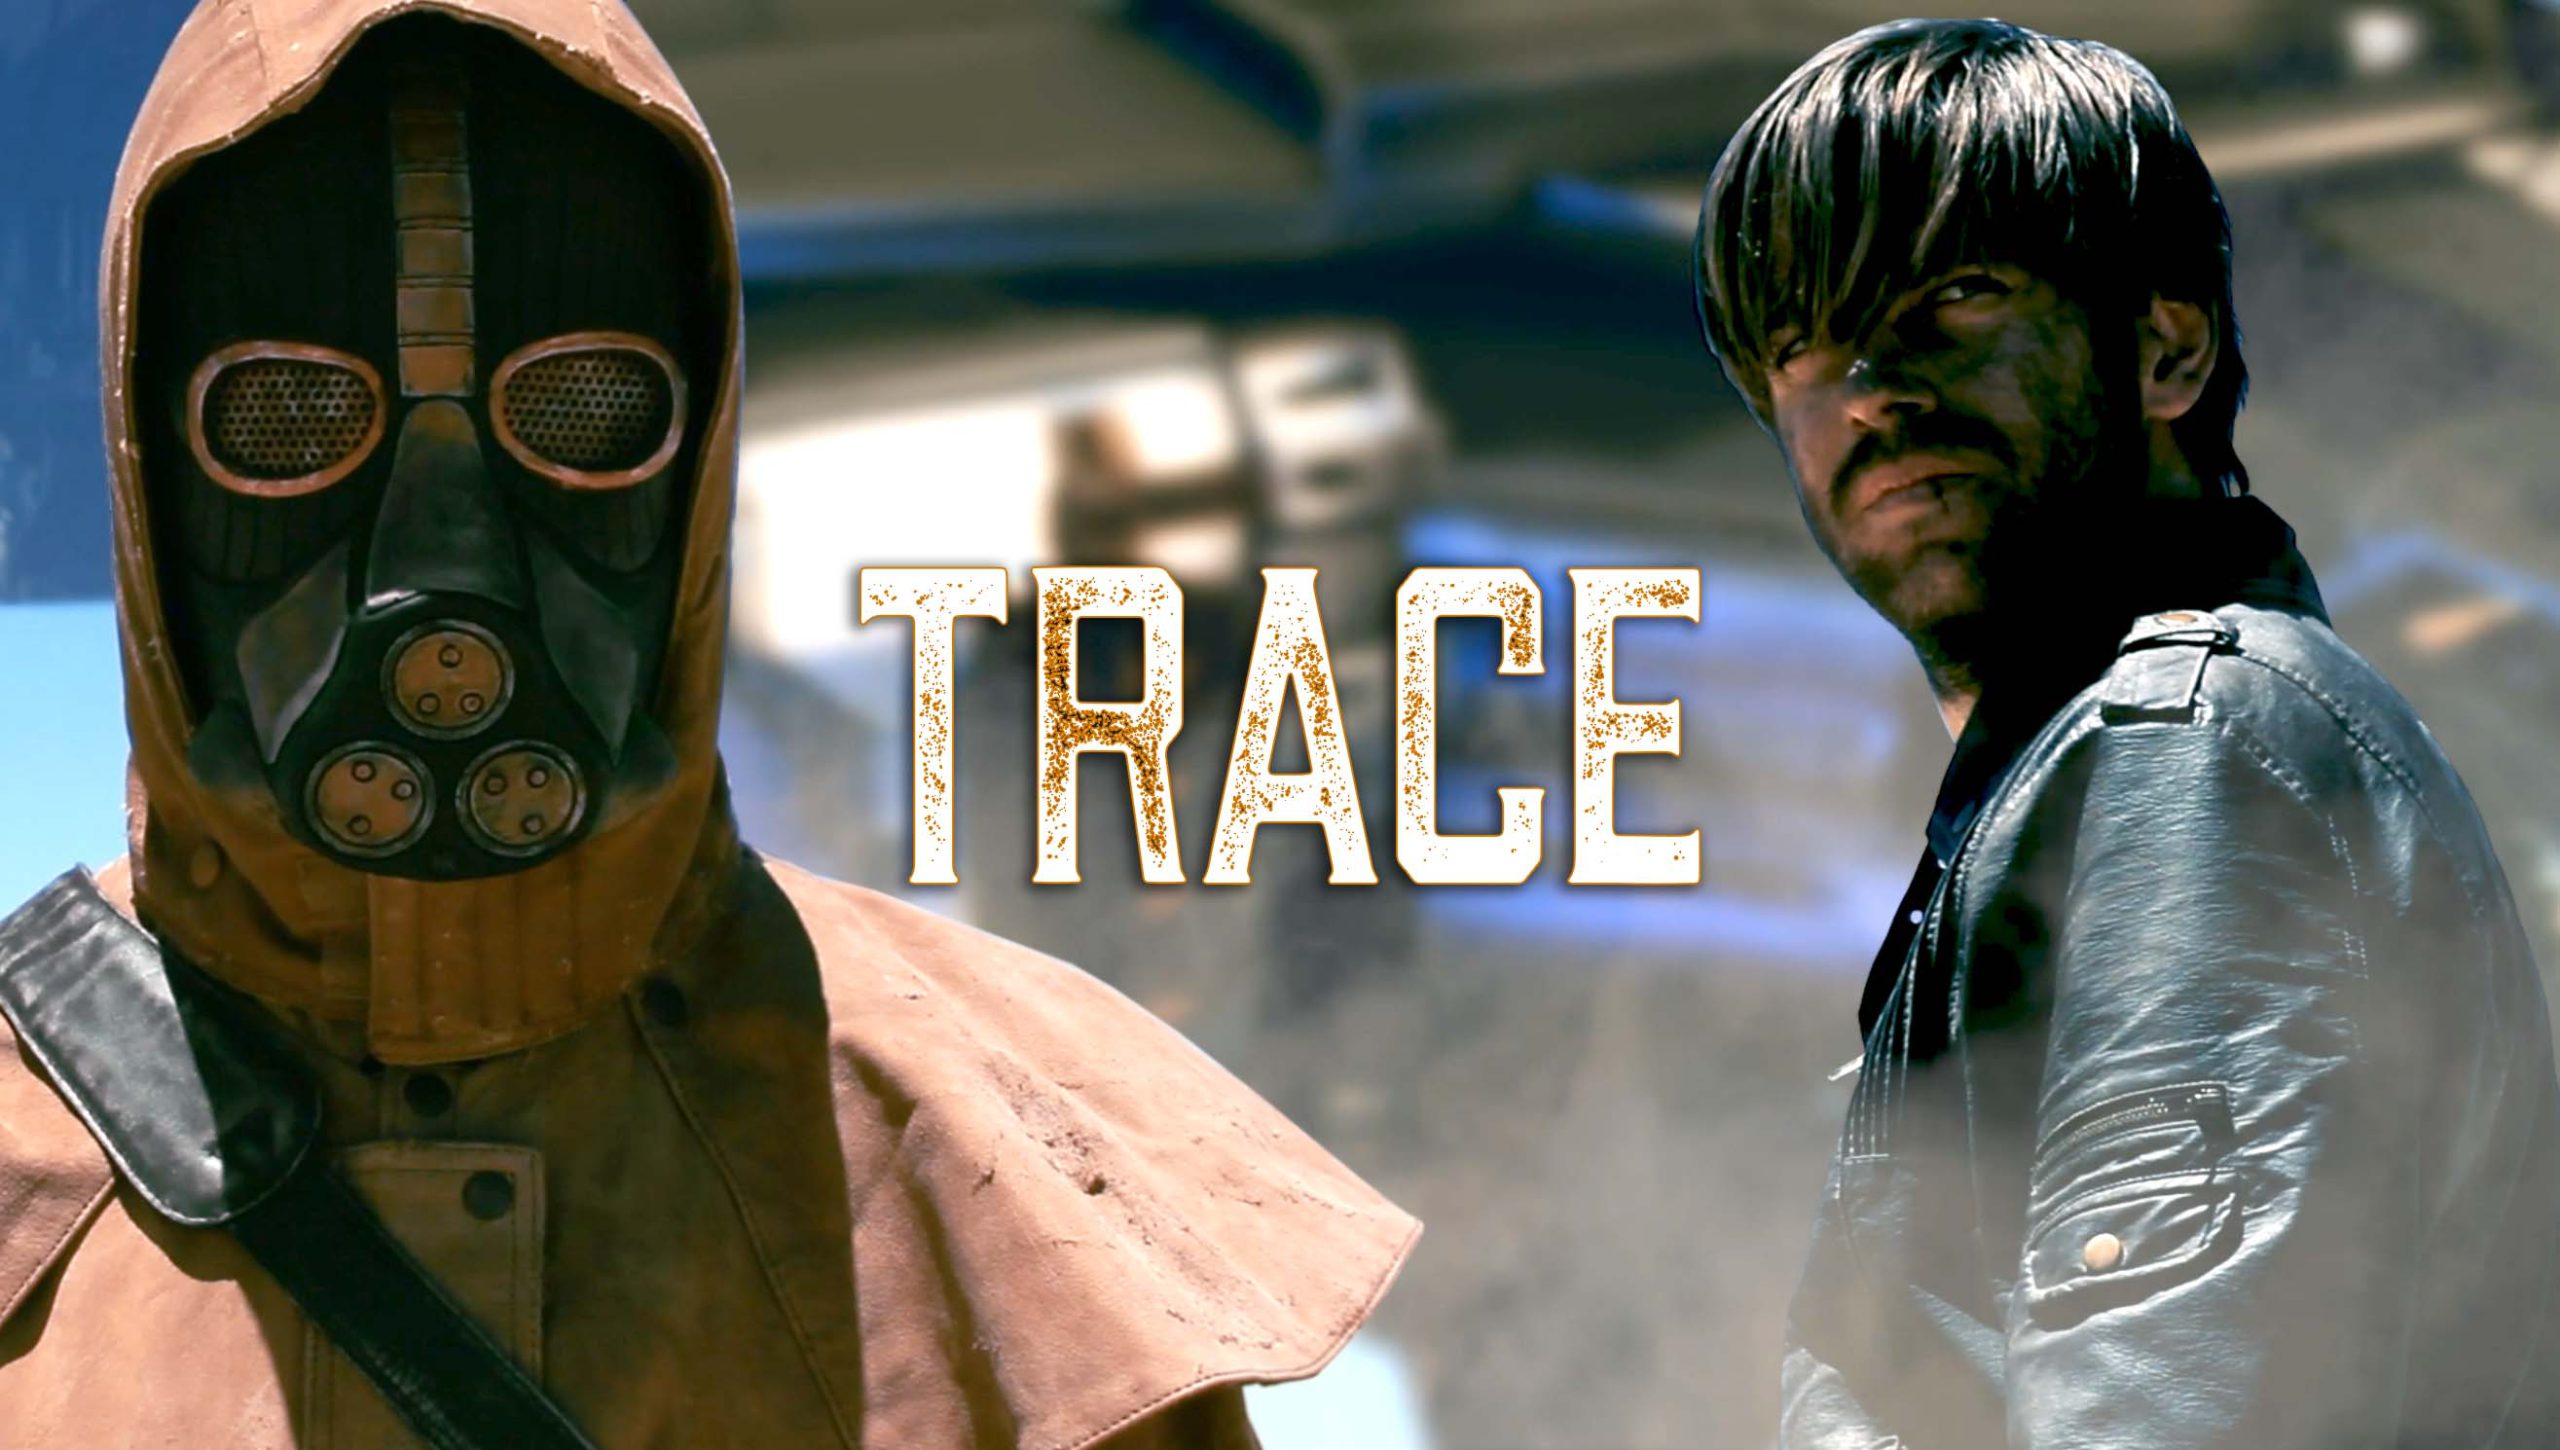 Trace Poster Image